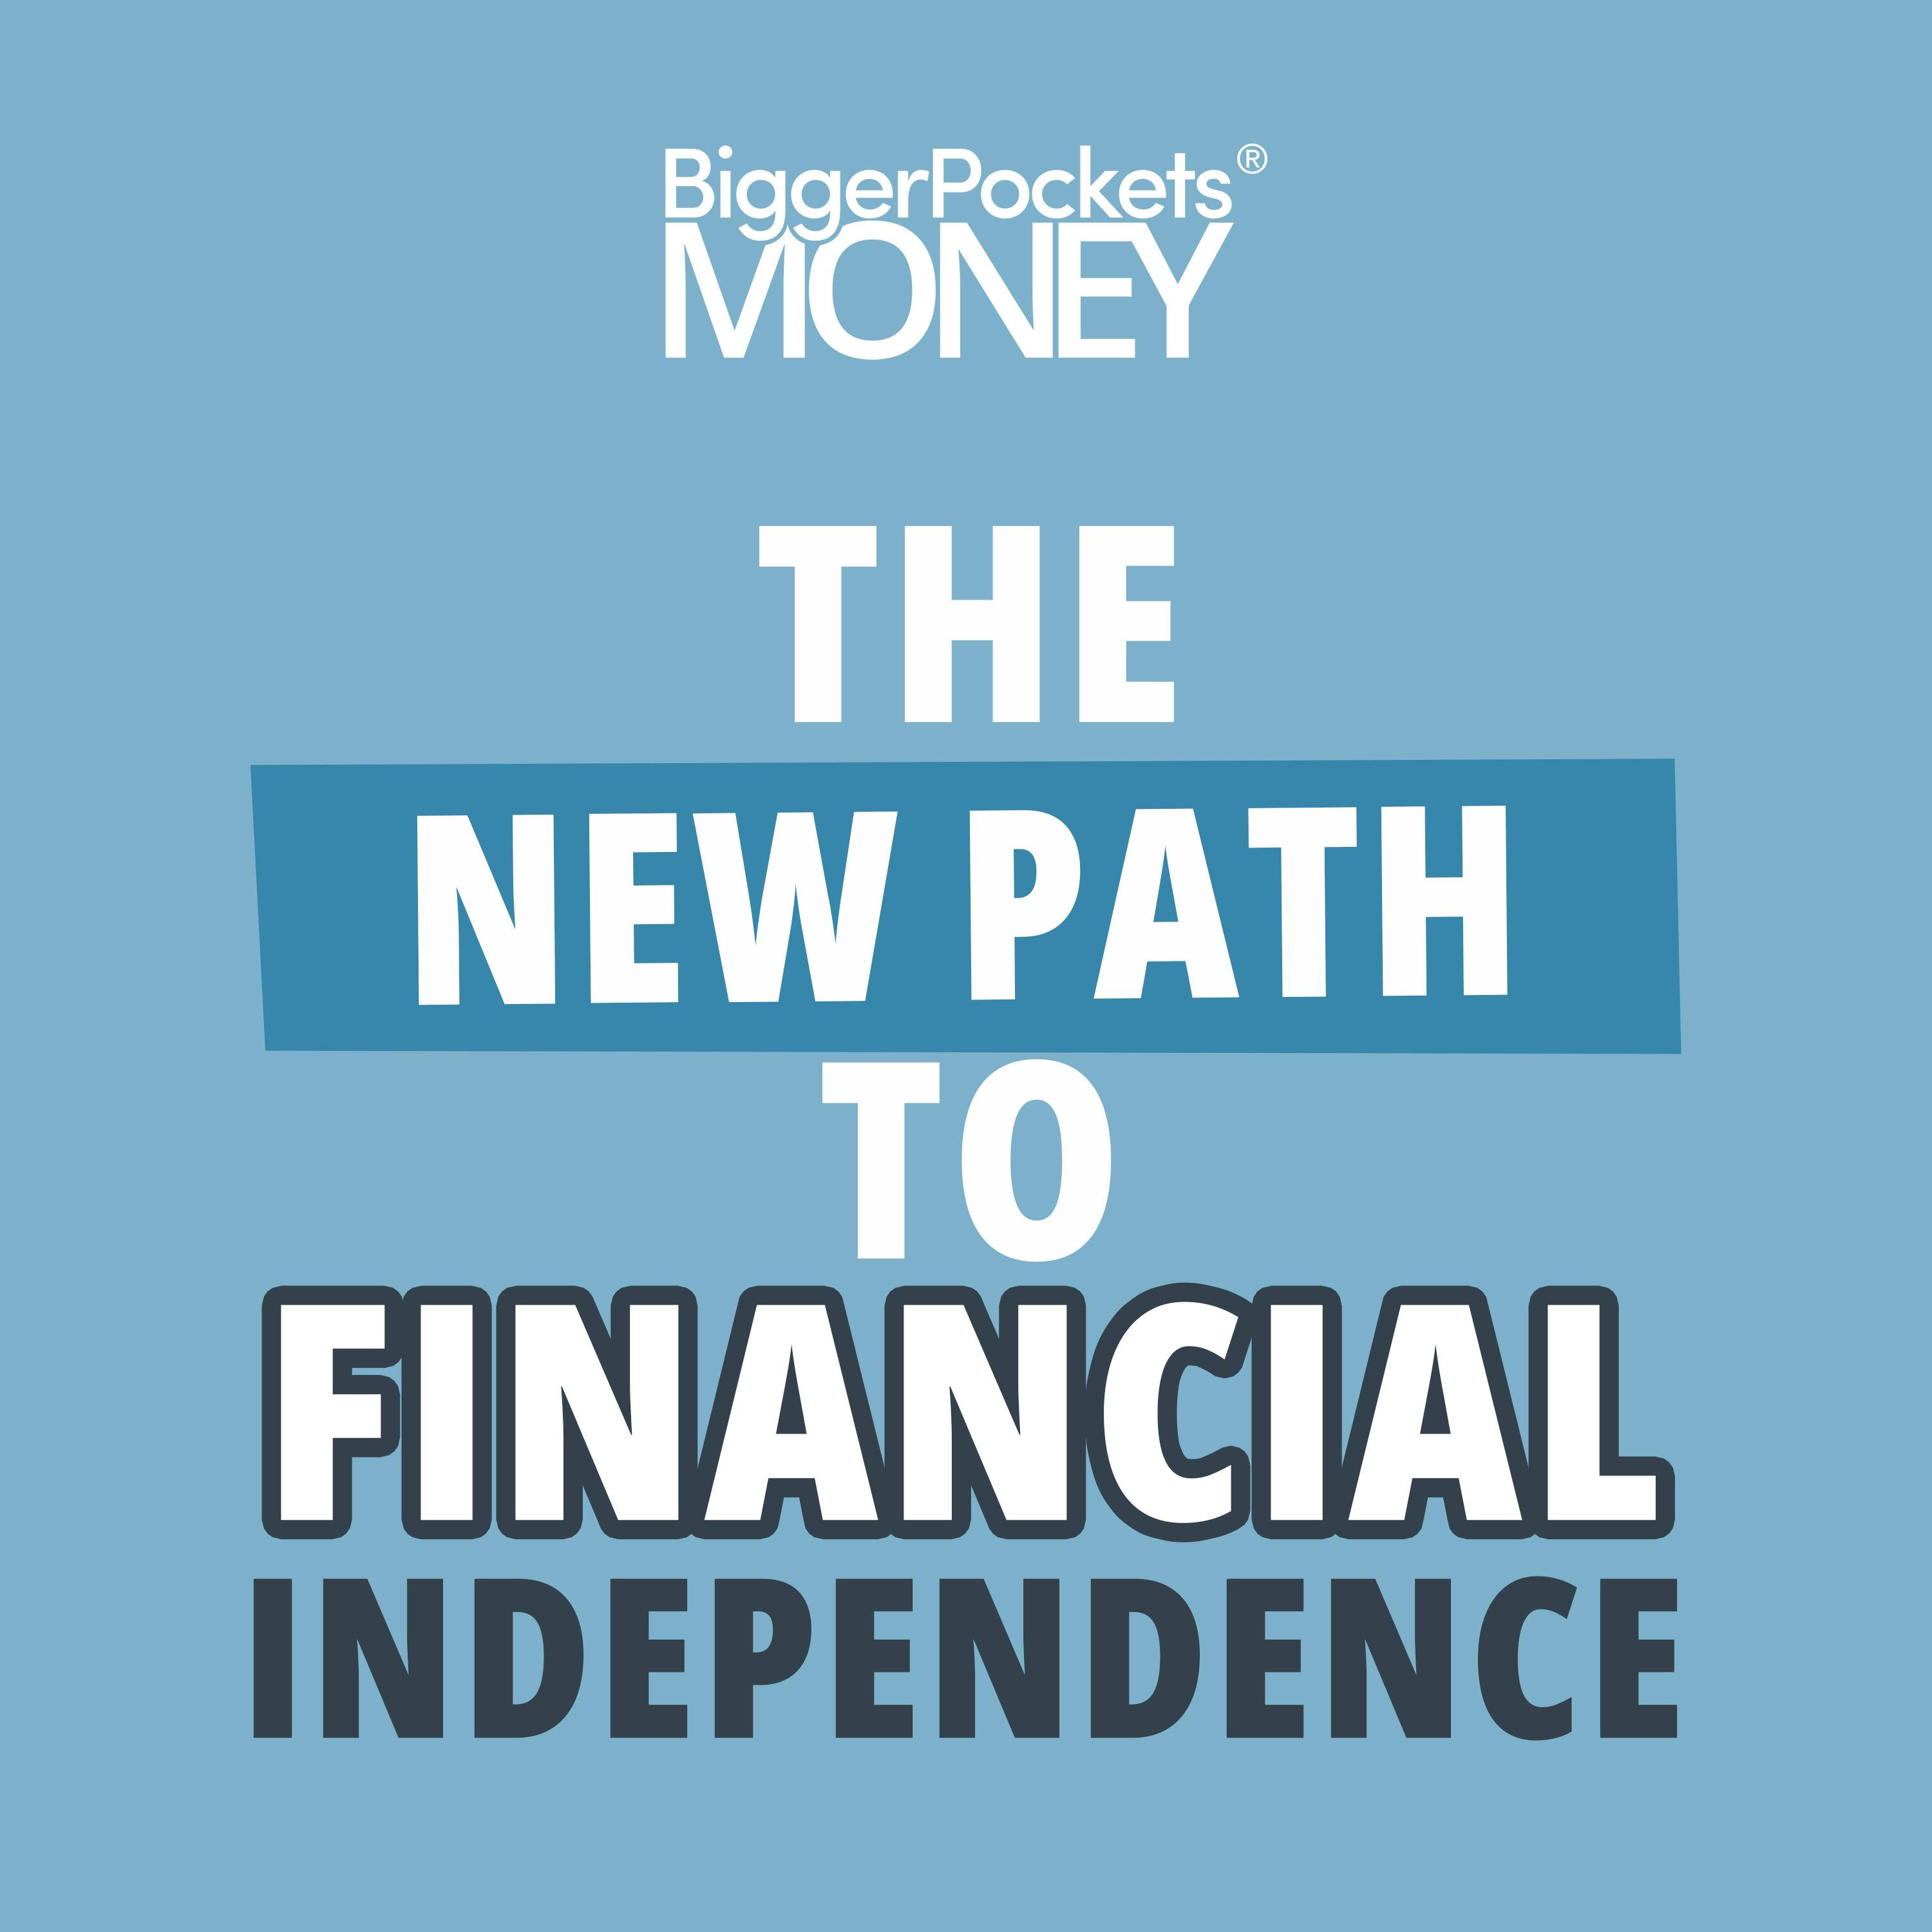 426: The New Path to Financial Independence is HERE